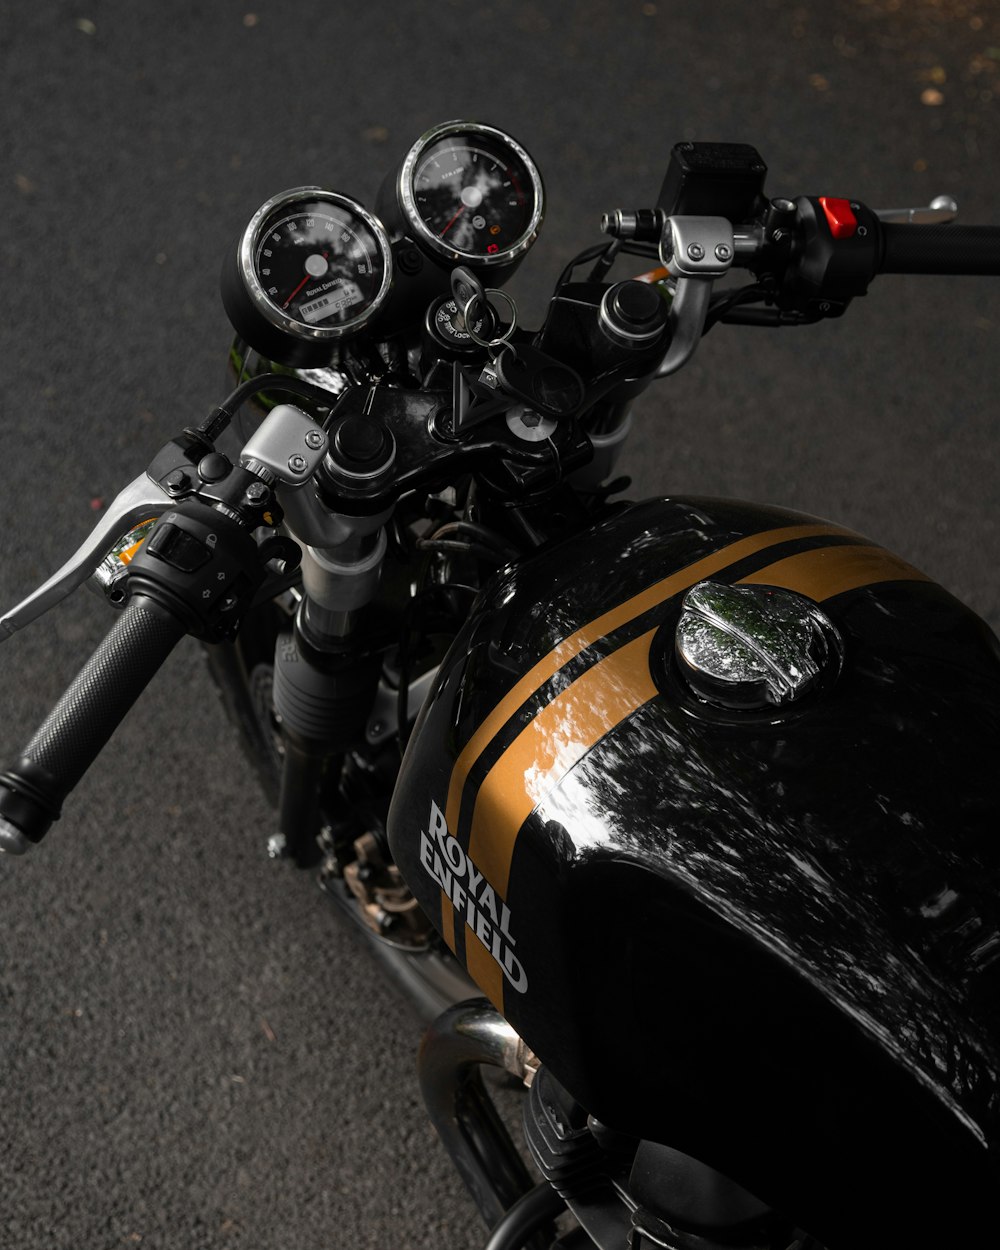 a close up of the handle bars on a motorcycle